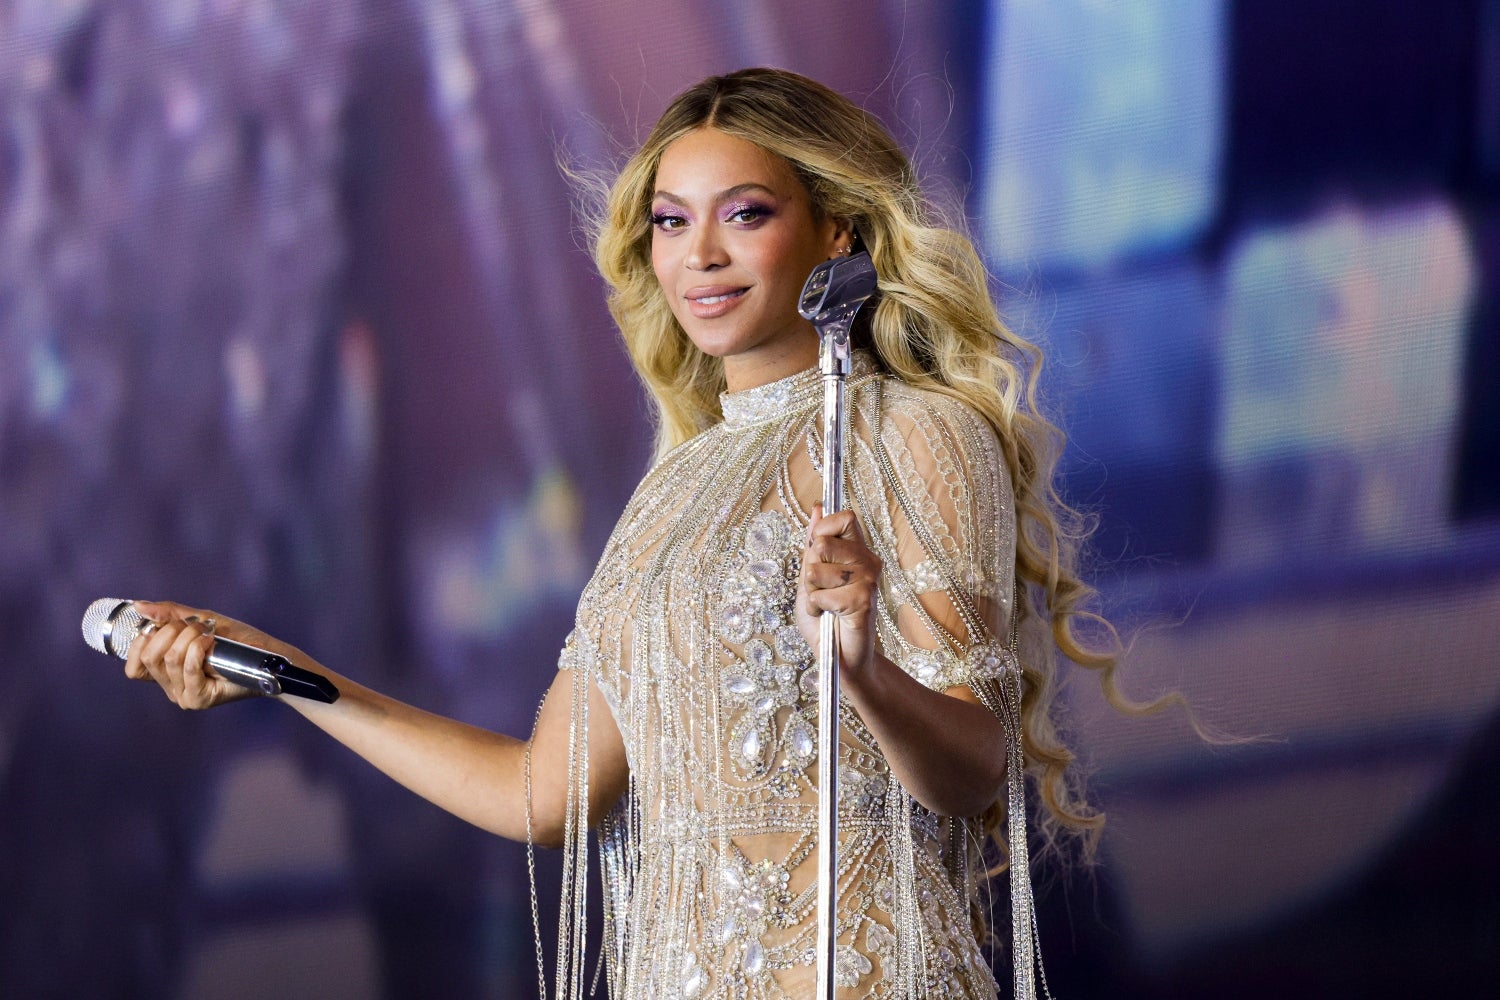 Actress Goes Into Labor At Beyoncé Concert, Pays Tribute To Star With Newborn’s Name